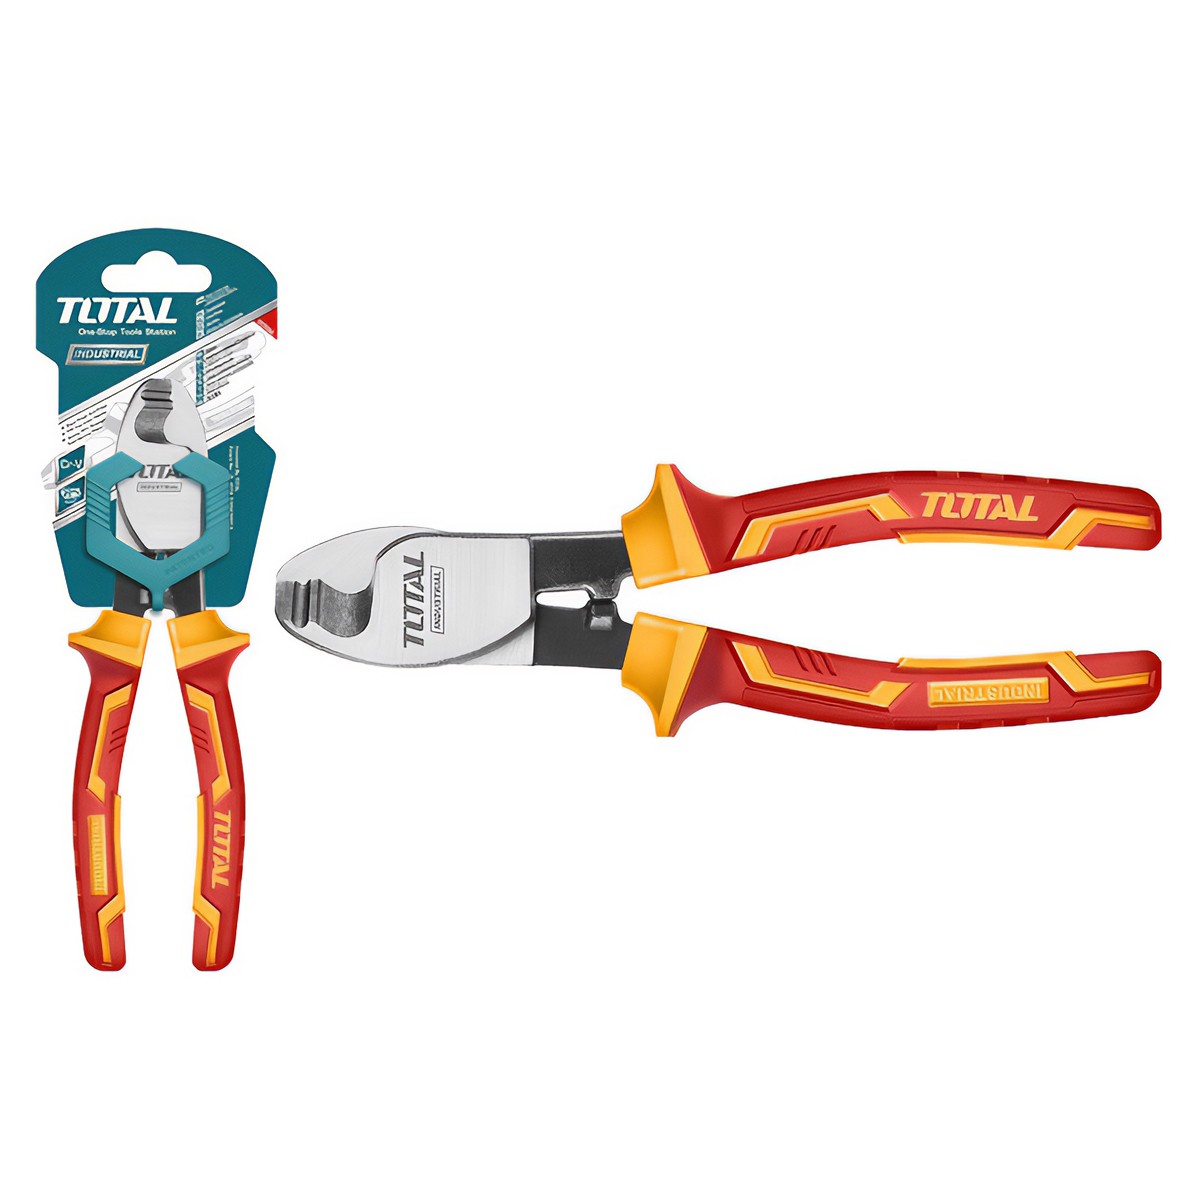 TOTAL INSULATED CABLE CUTTER 1000V 160MM